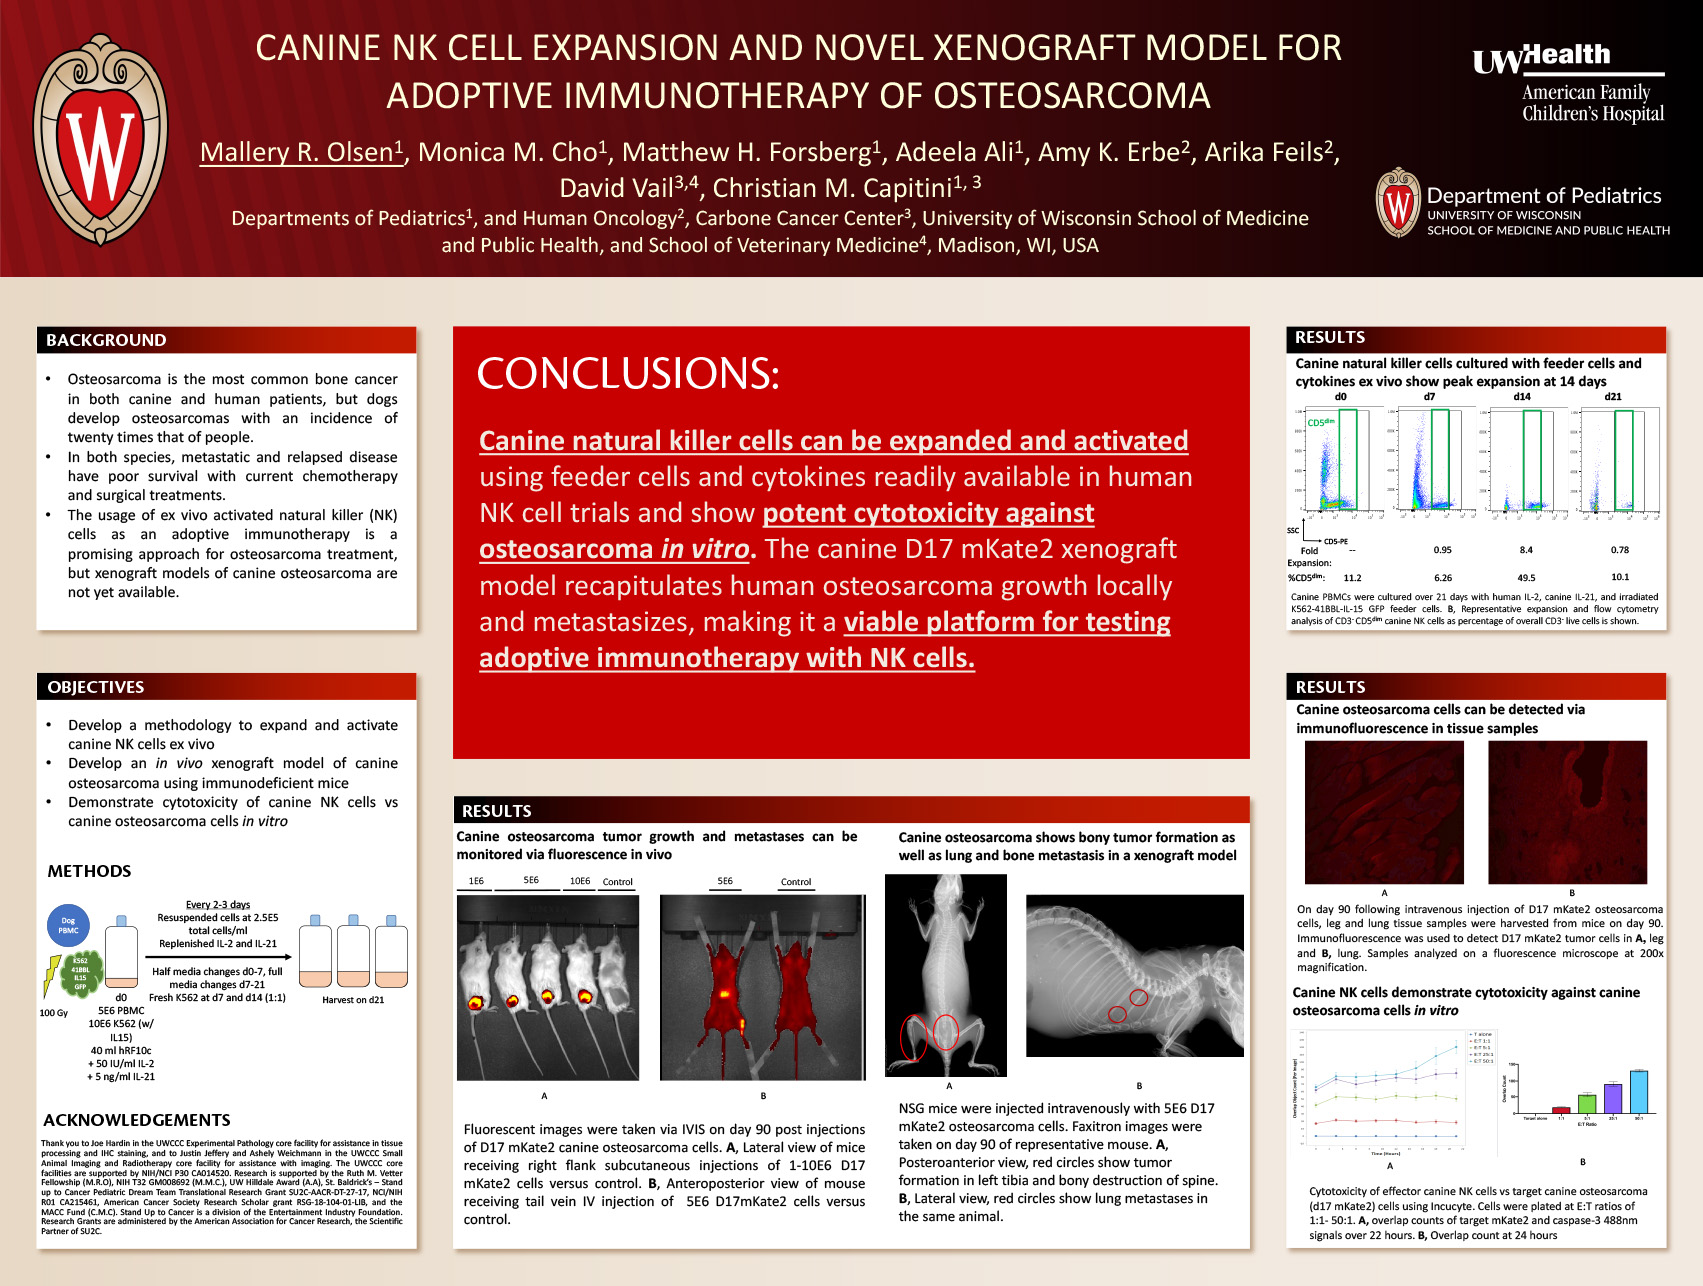 7. CANINE NK CELL EXPANSION AND NOVEL XENOGRAFT MODEL FOR ADOPTIVE IMMUNOTHERAPY OF OSTEOSARCOMA poster image